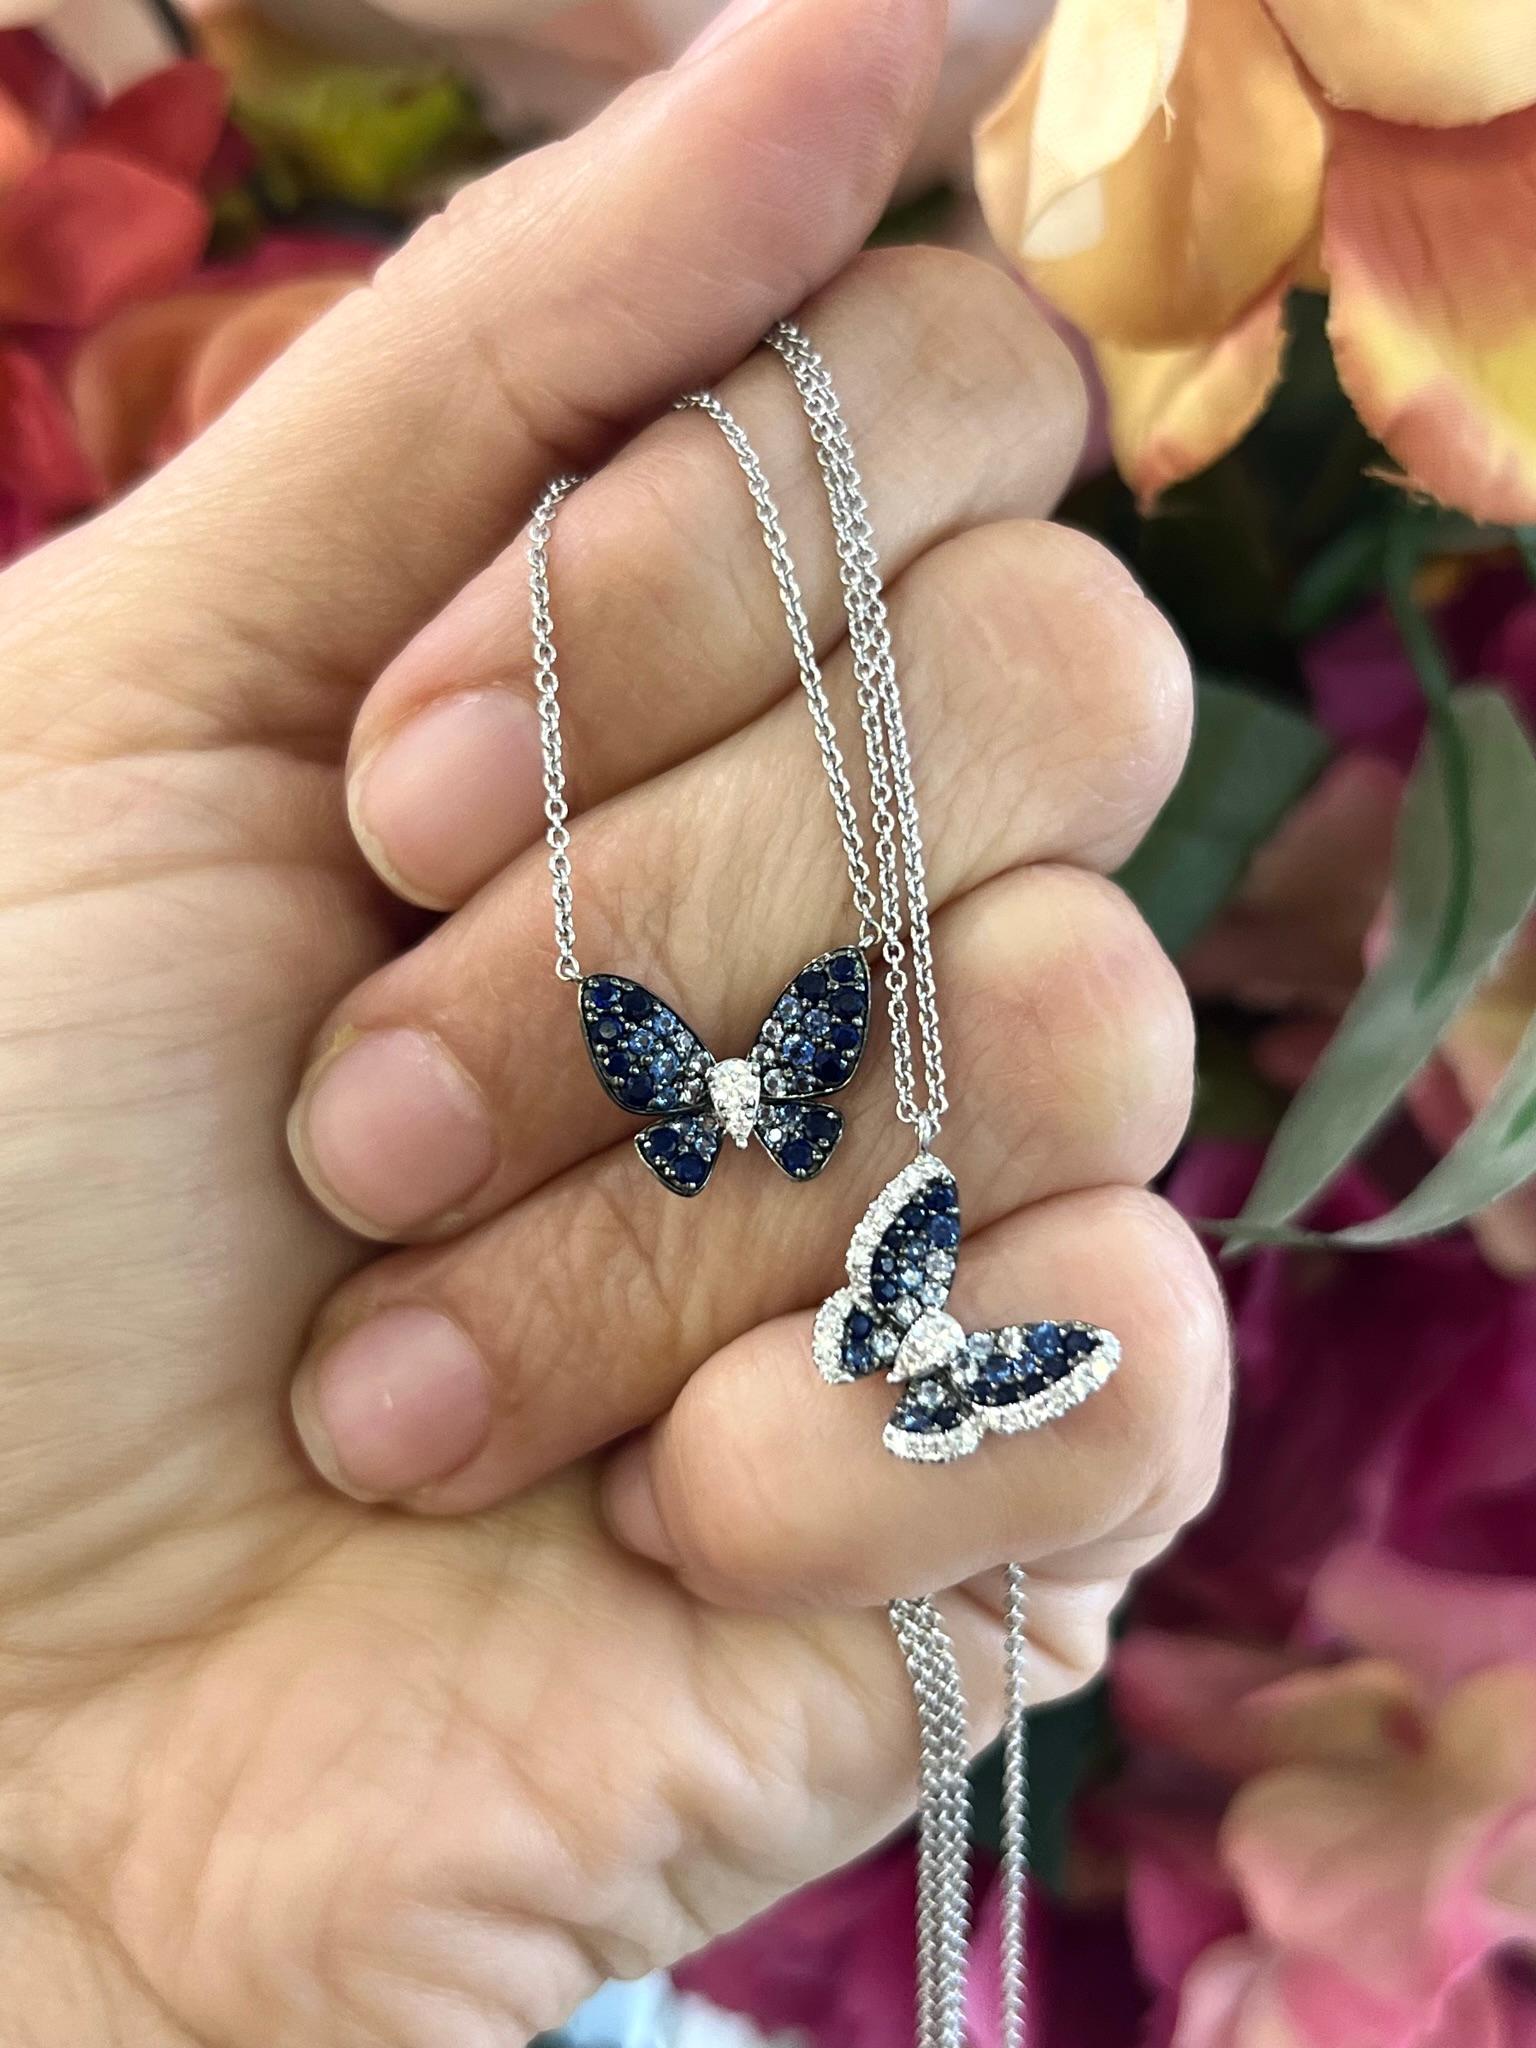 14K white gold sapphire and diamond butterfly pendant necklace.

This elegant pendant necklace features a unique butterfly shape and a stunning ombre effect of sapphires ranging from dark to lighter blue. Crafted with genuine sapphires, this